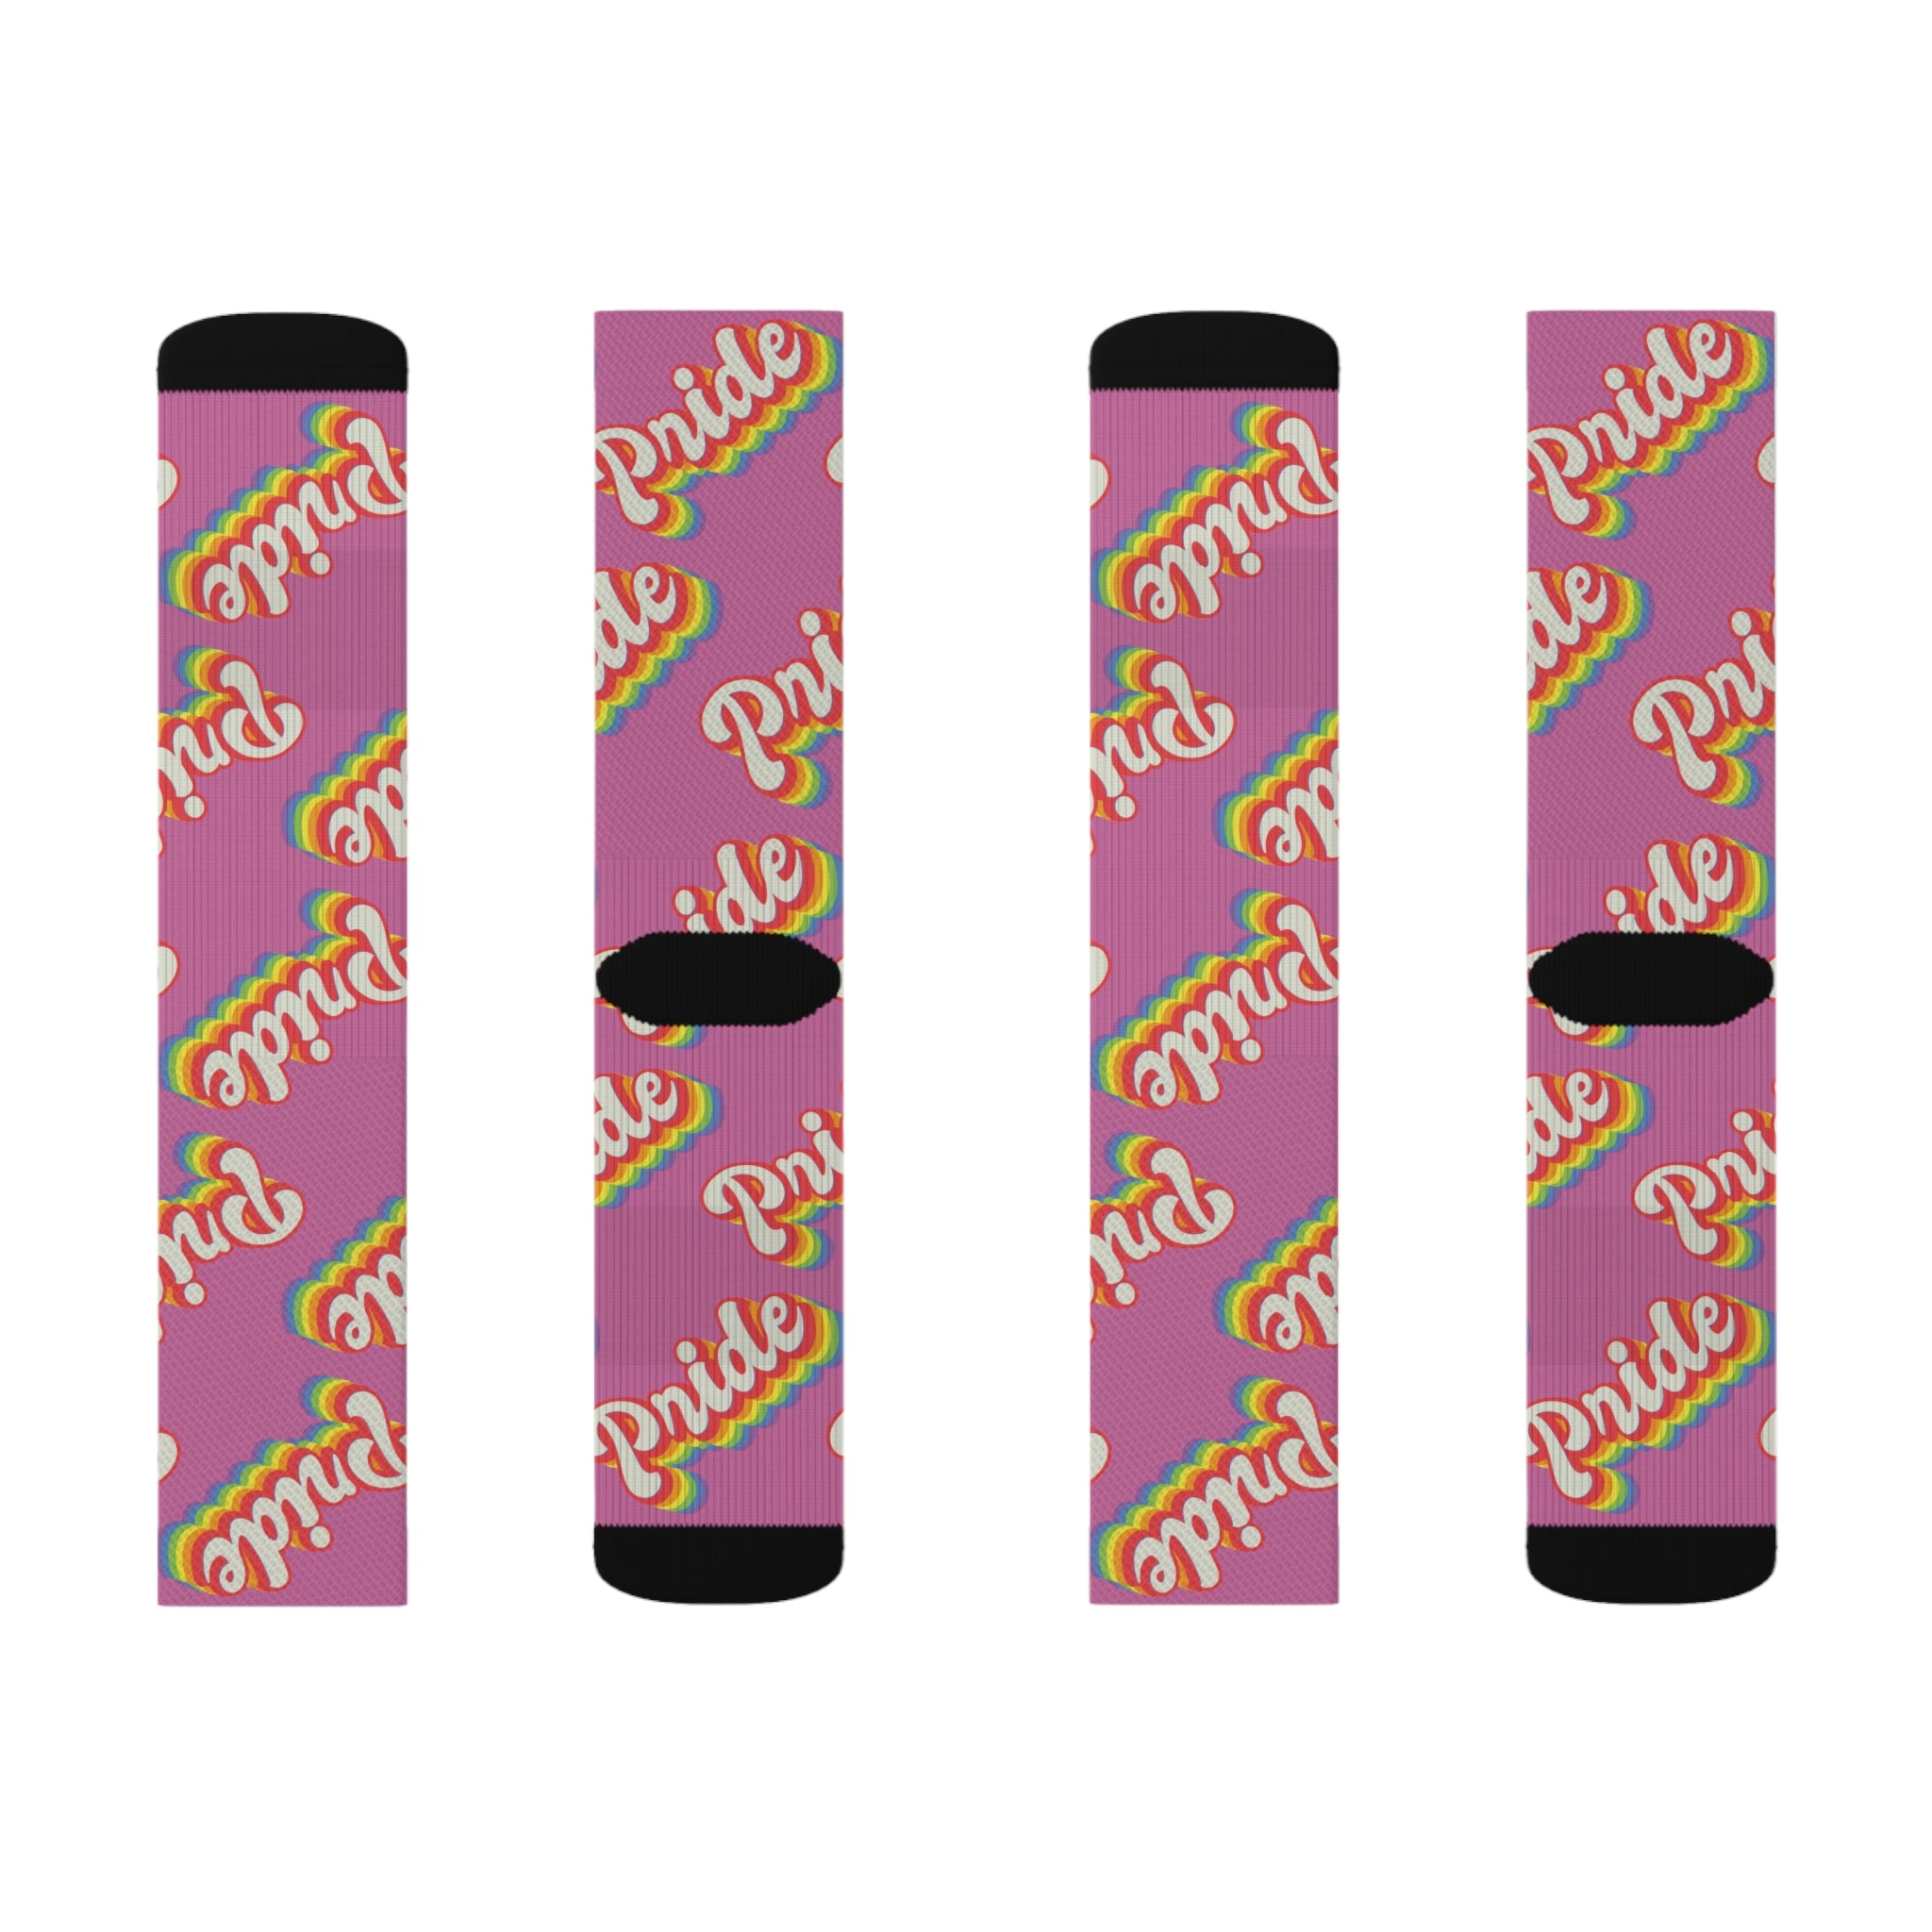 A pair of Pride Socks with a sublimated print of the word 'pretty' for added comfort.